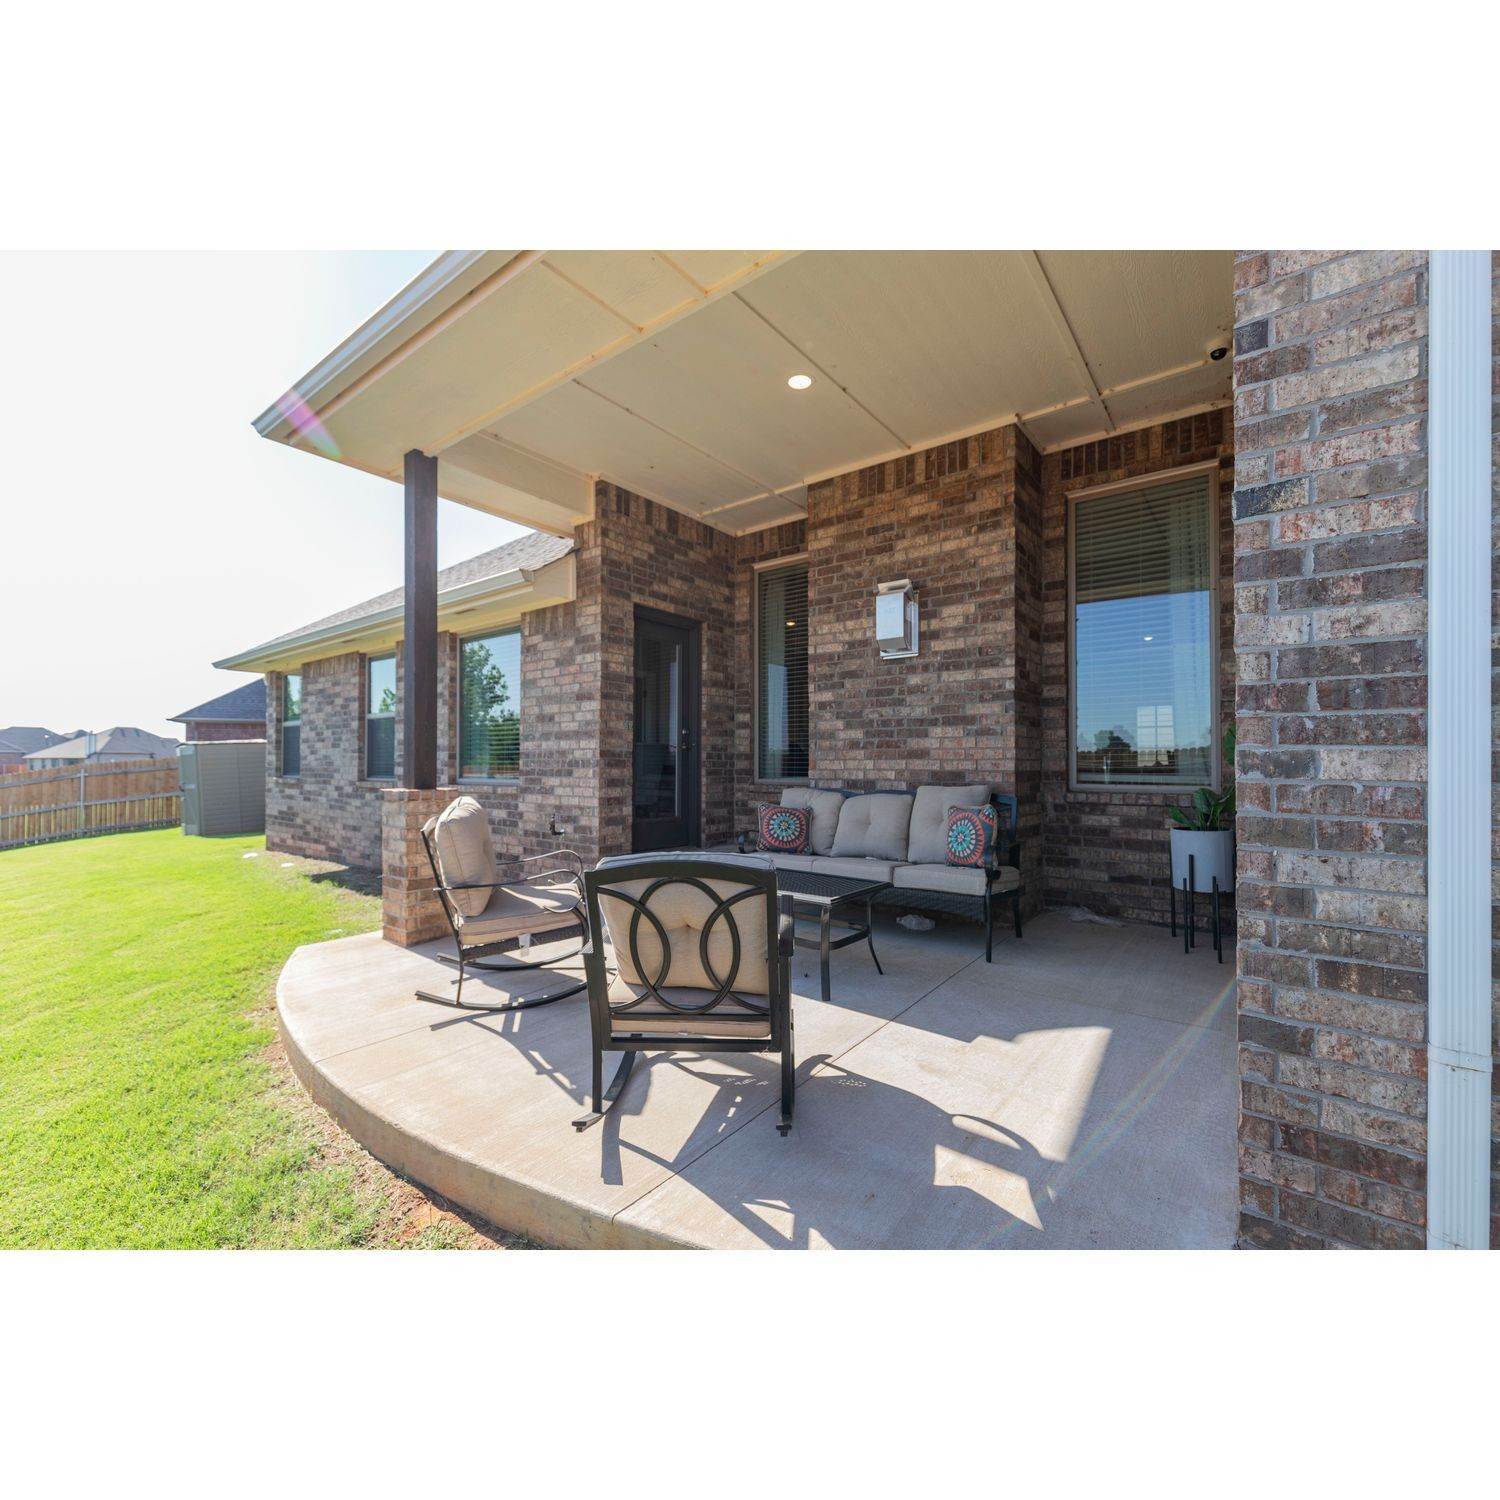 46. Canyons建于 10533 SW 52nd St, Mustang, OK 73064